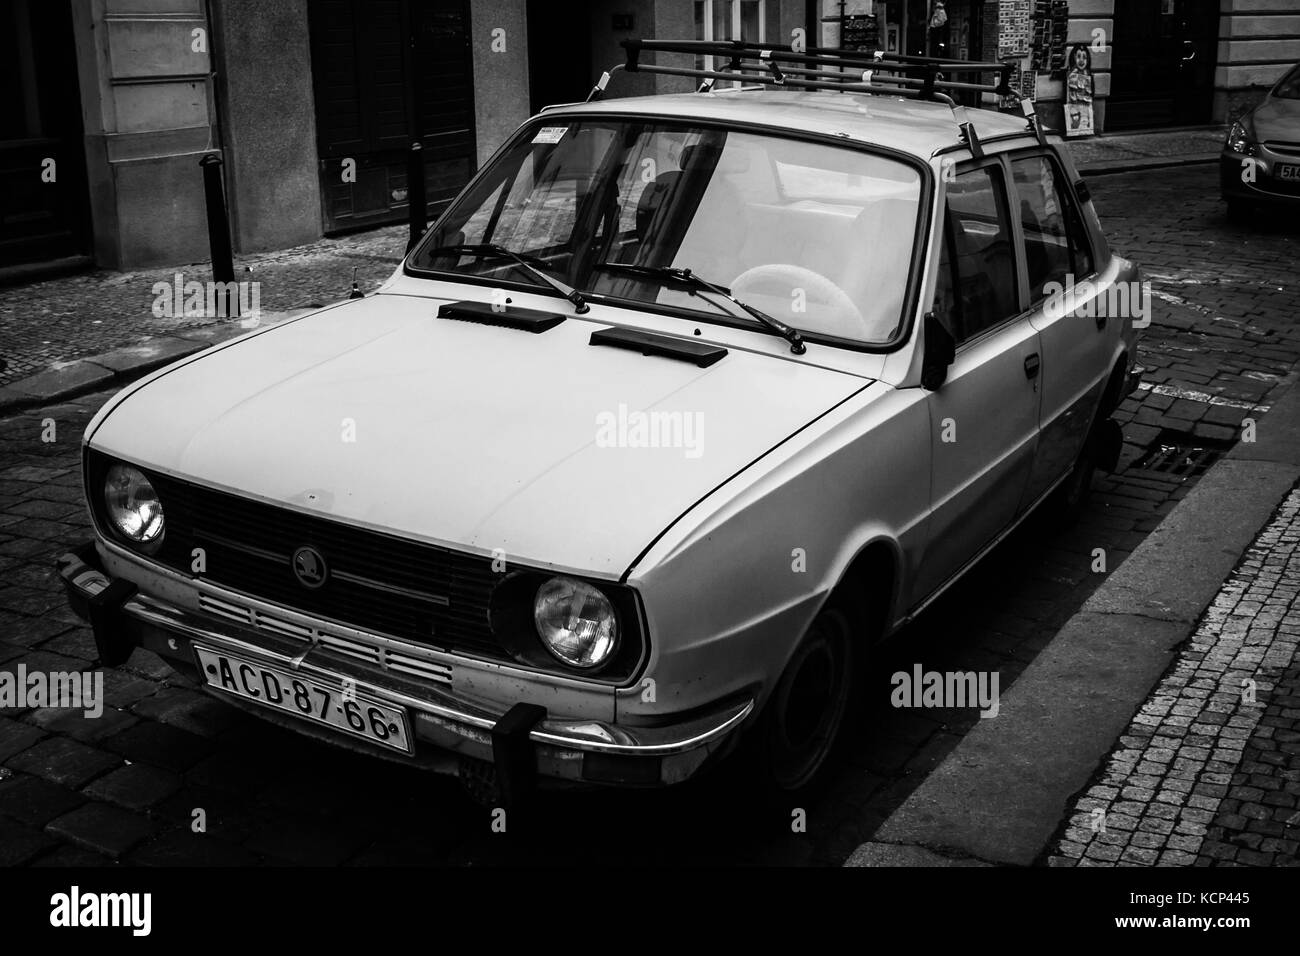 an old skoda car on the streets of prague Stock Photo